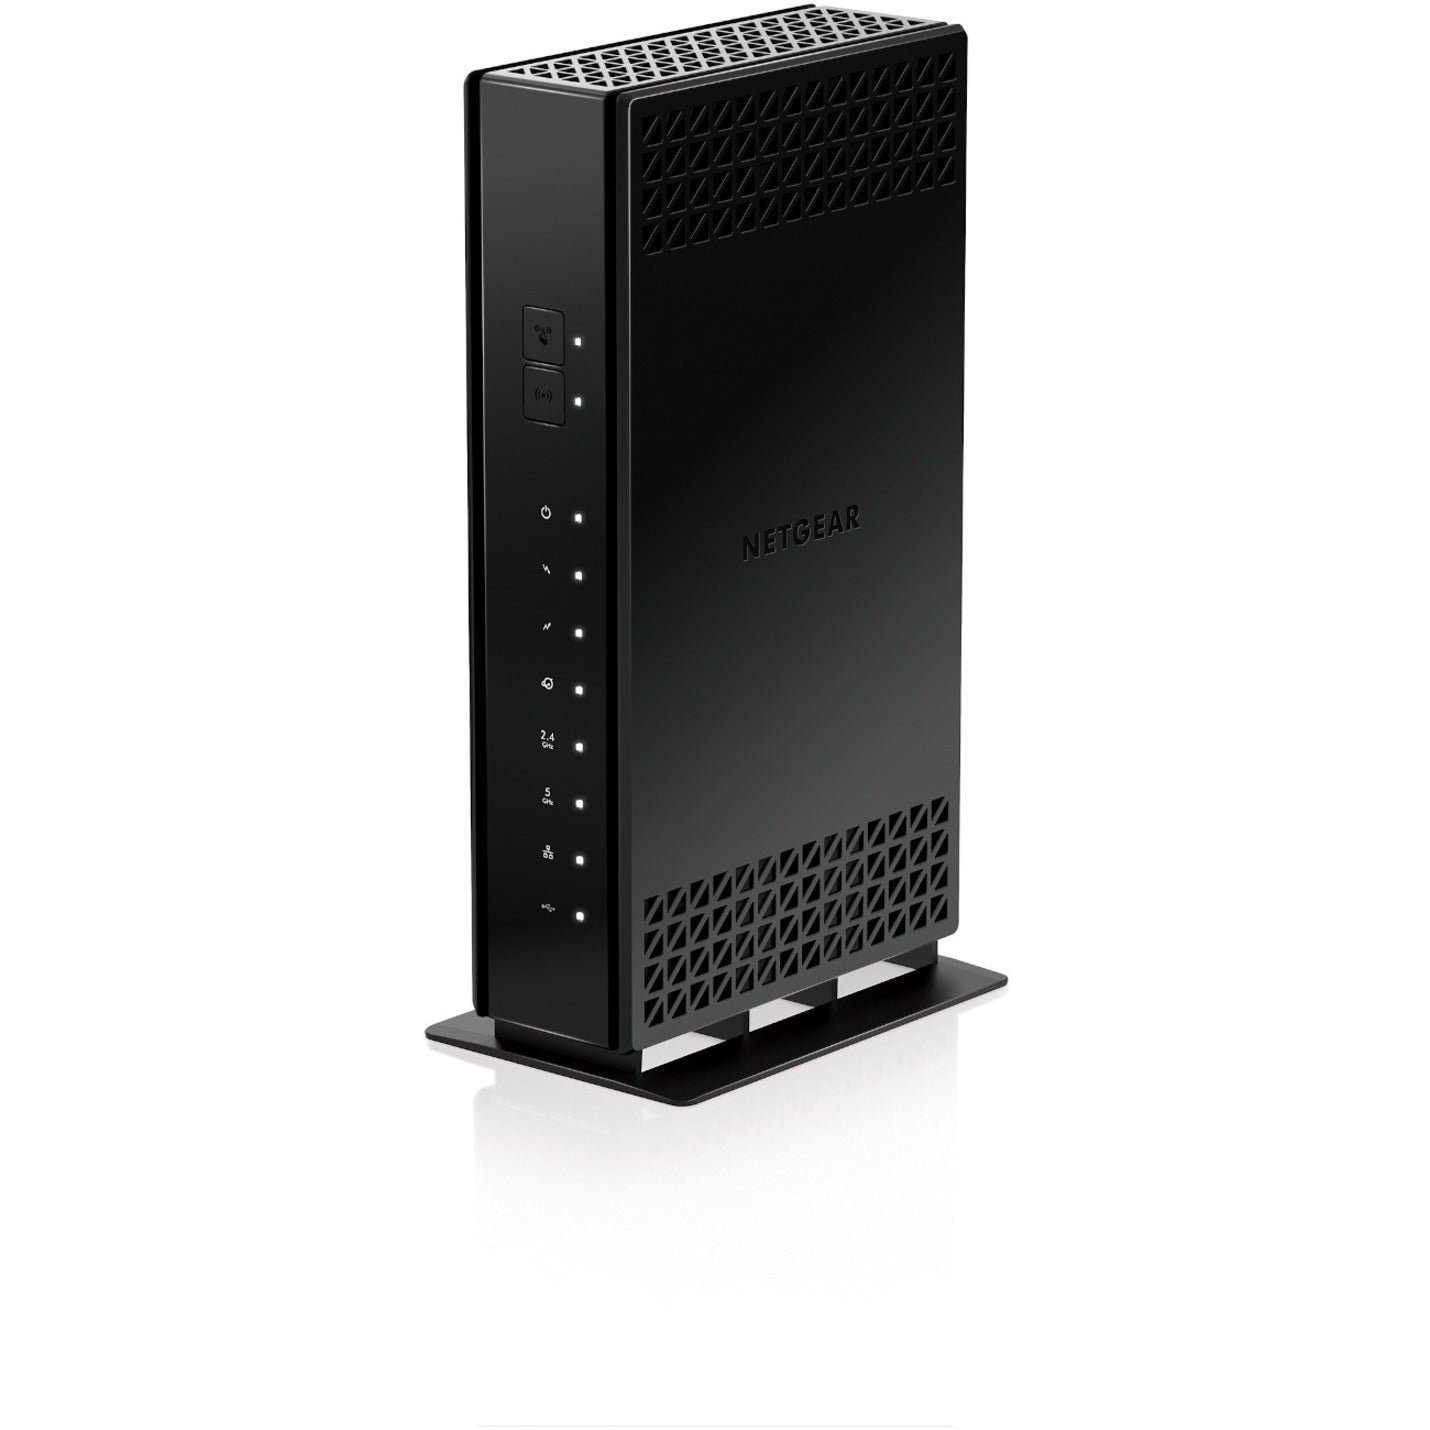 Netgear AC1200 WiFi Cable Modem Router - High-Speed Internet and Reliable Connectivity [Discontinued]